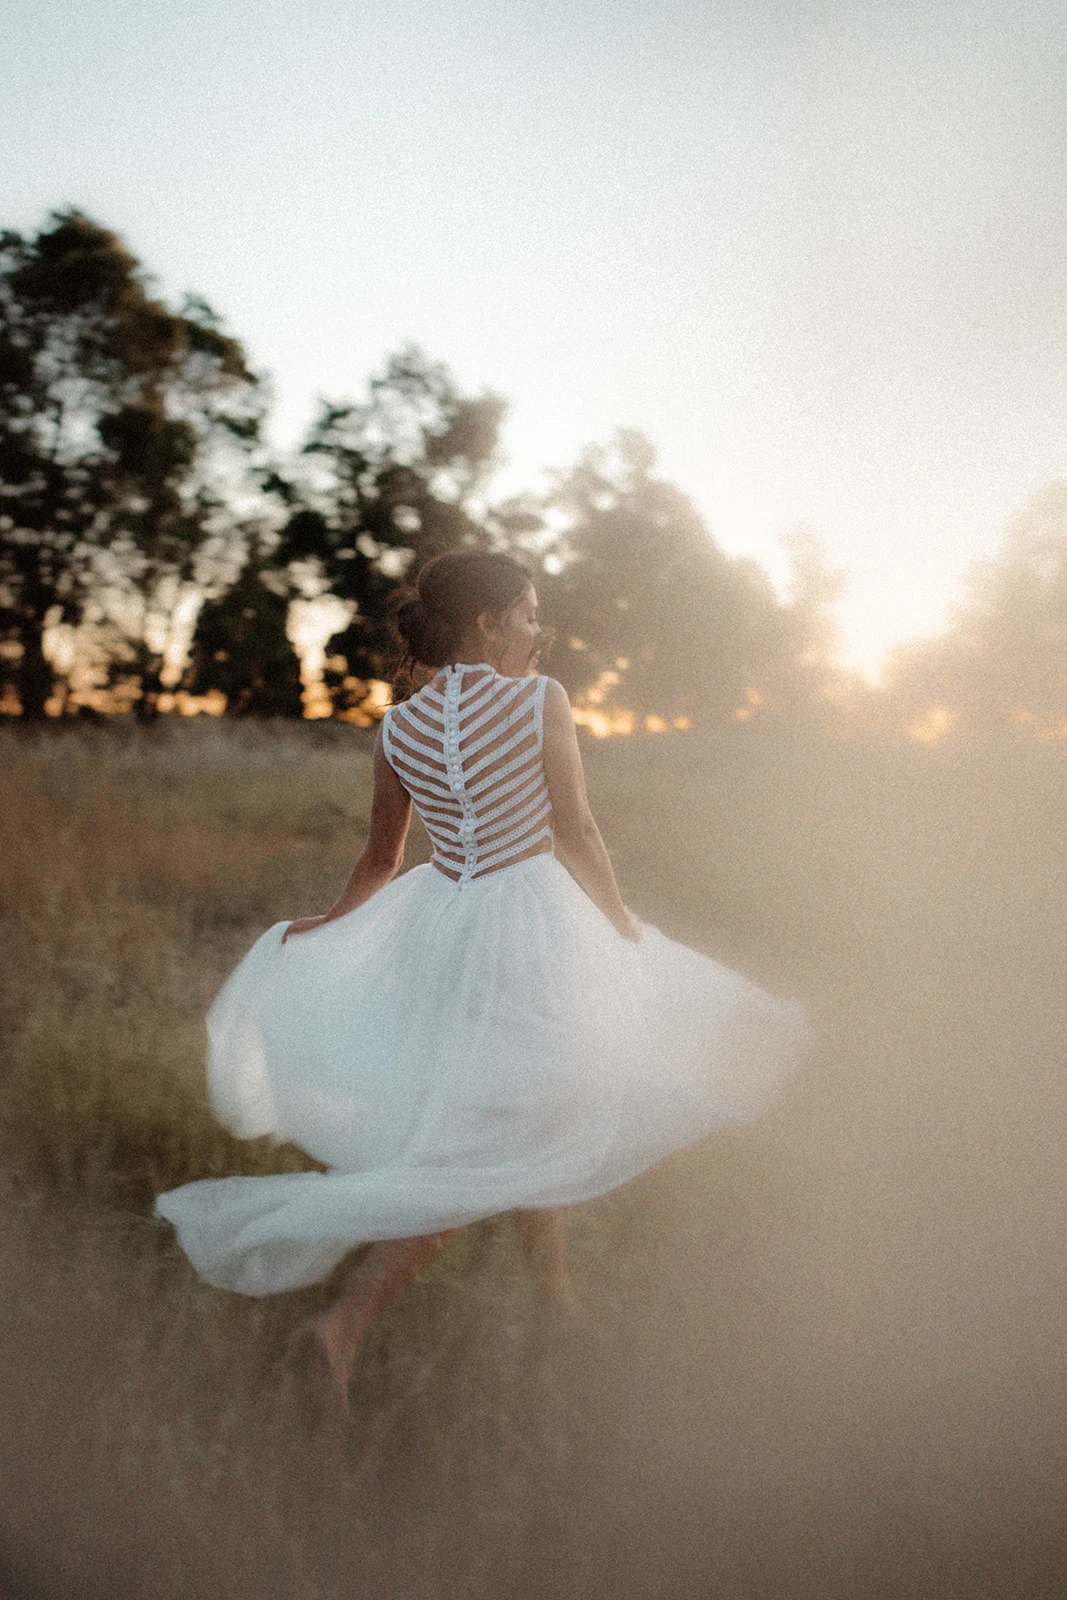 alannah liddell photography weddings perth bridal gown floral design venue styling